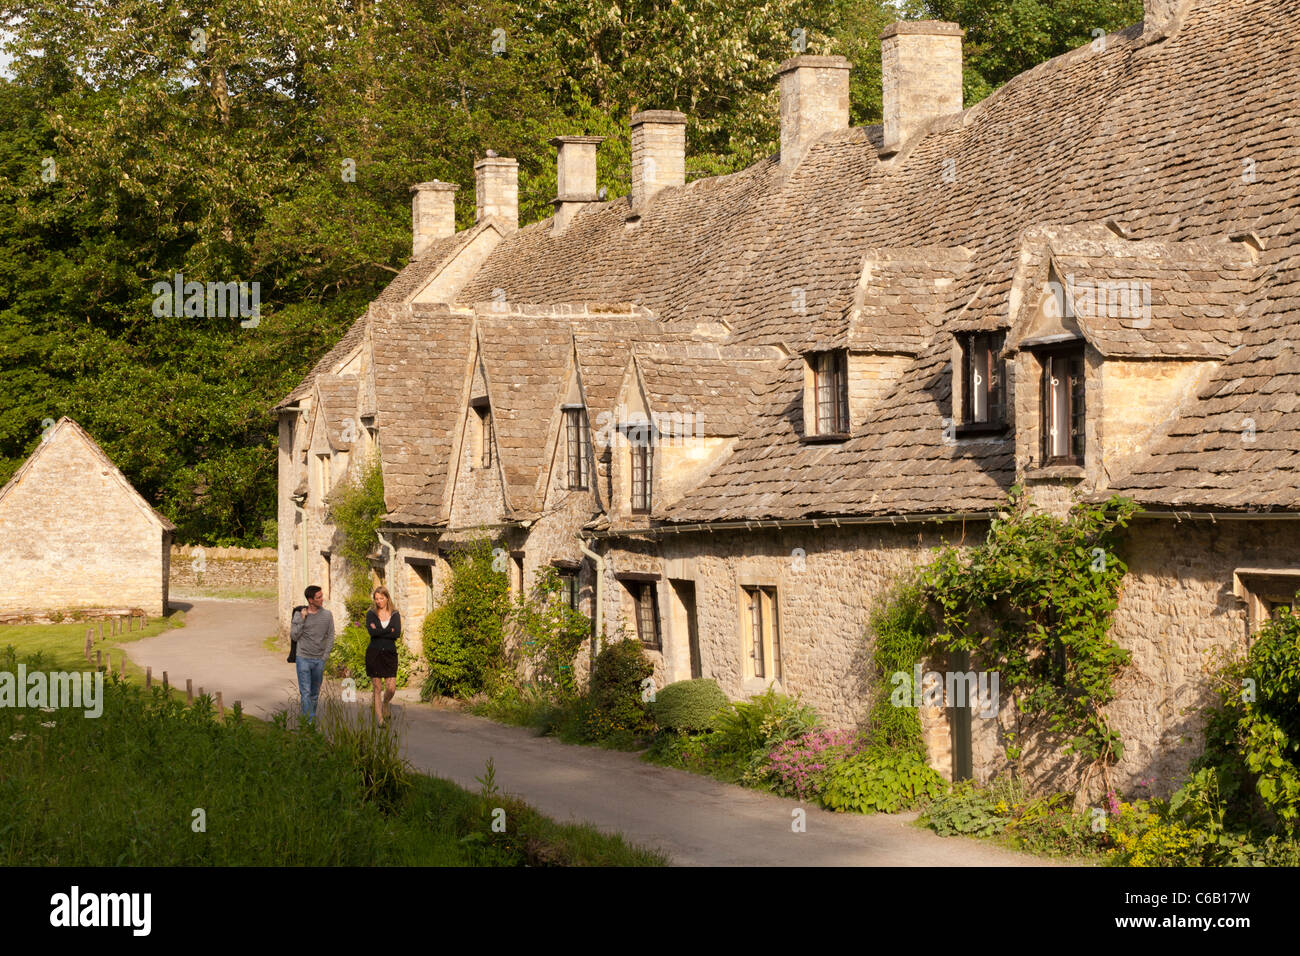 A young couple enjoy an evening stroll beside Arlington Row in the Cotswold village of Bibury, Gloucestershire UK Stock Photo